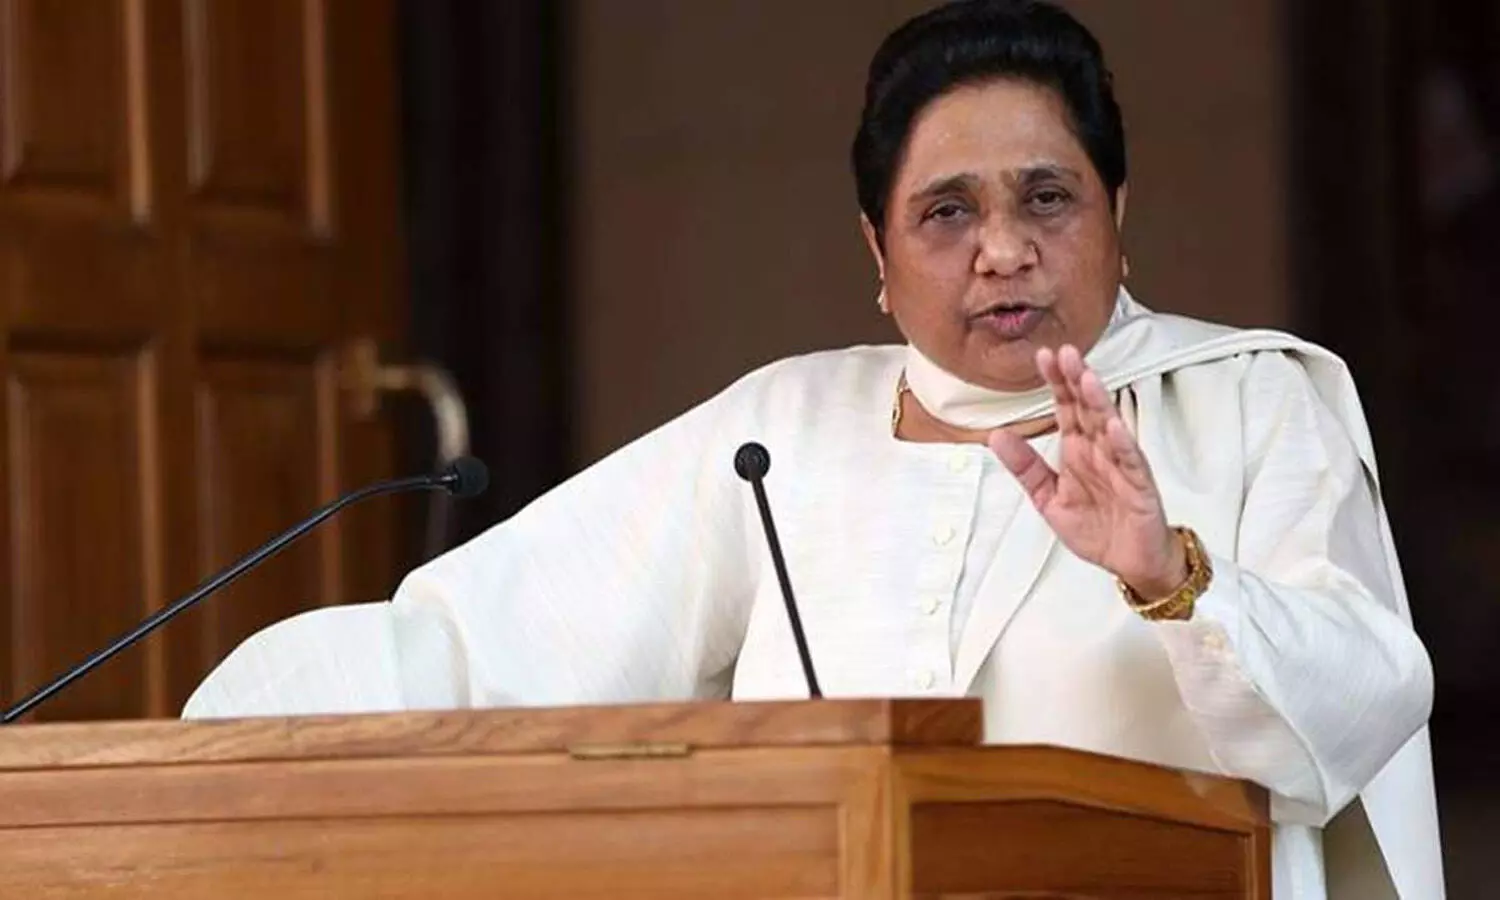 Rebels are a tough challenge for BSP this election